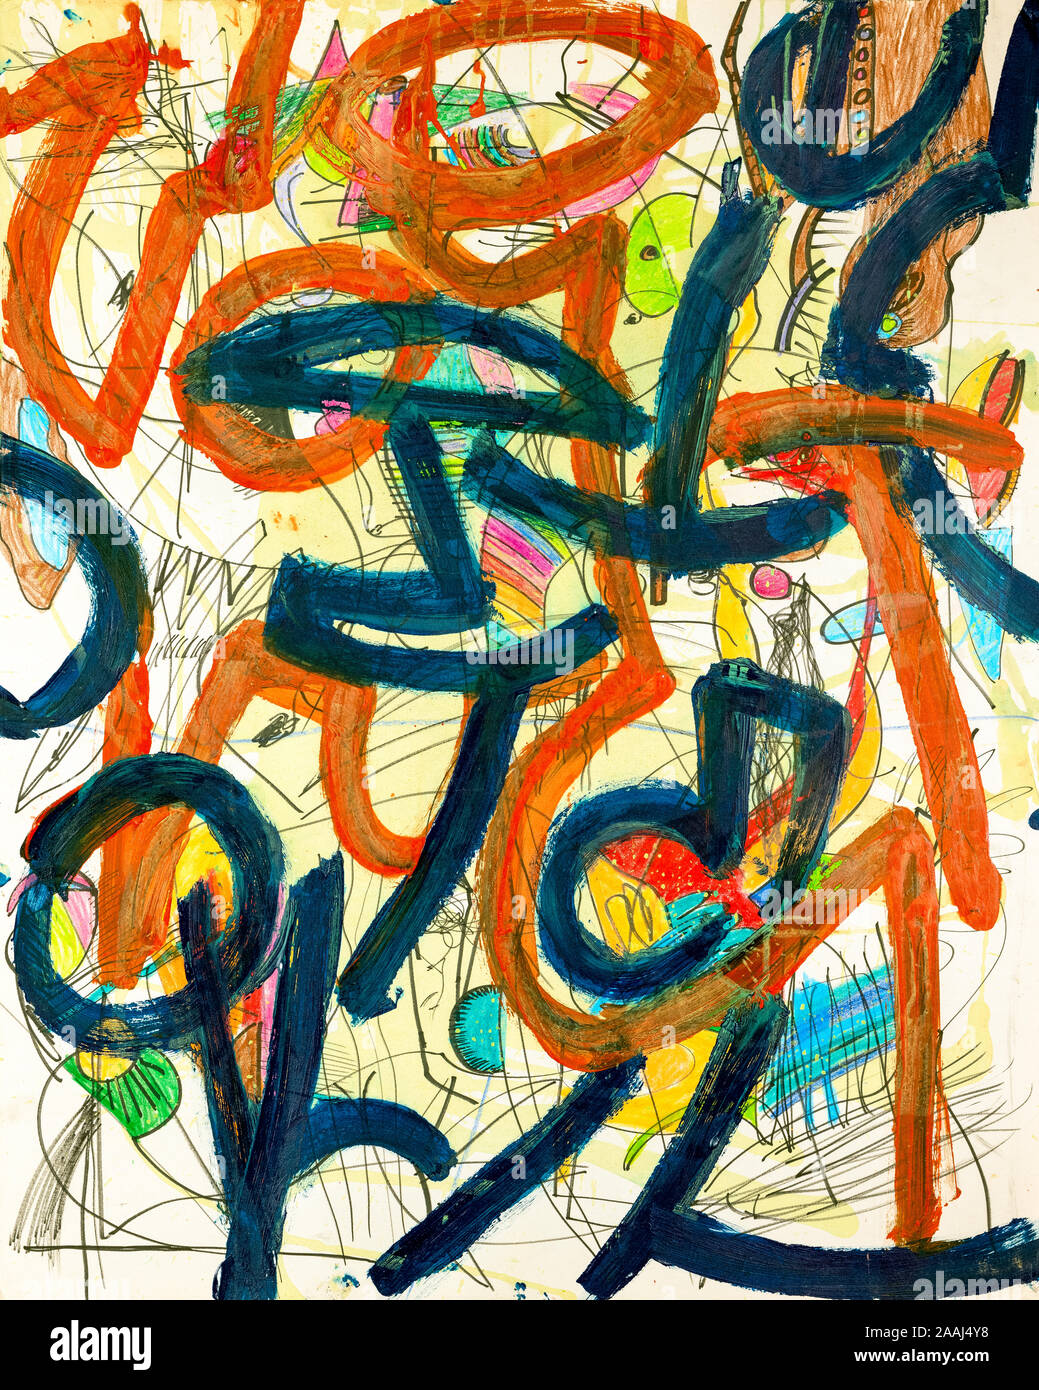 Original abstract painting on paper with vibrant colors, strong lines, and shapes. Stock Photo